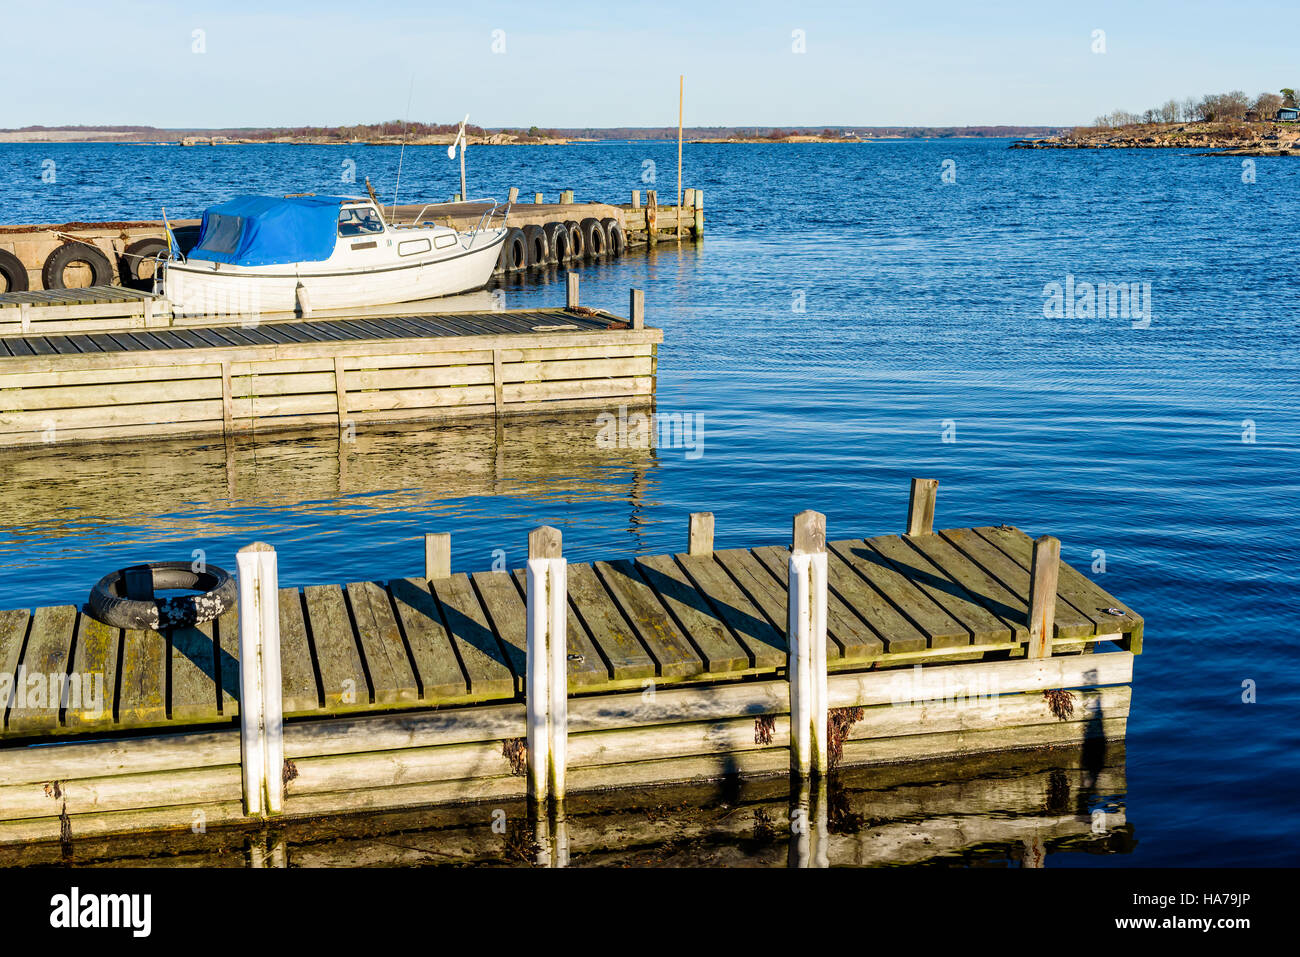 Tjurko, Sweden - November 24, 2016: Travel documentary of small local marina in fall. One motorboat moored dockside and the archipelago visible in the Stock Photo